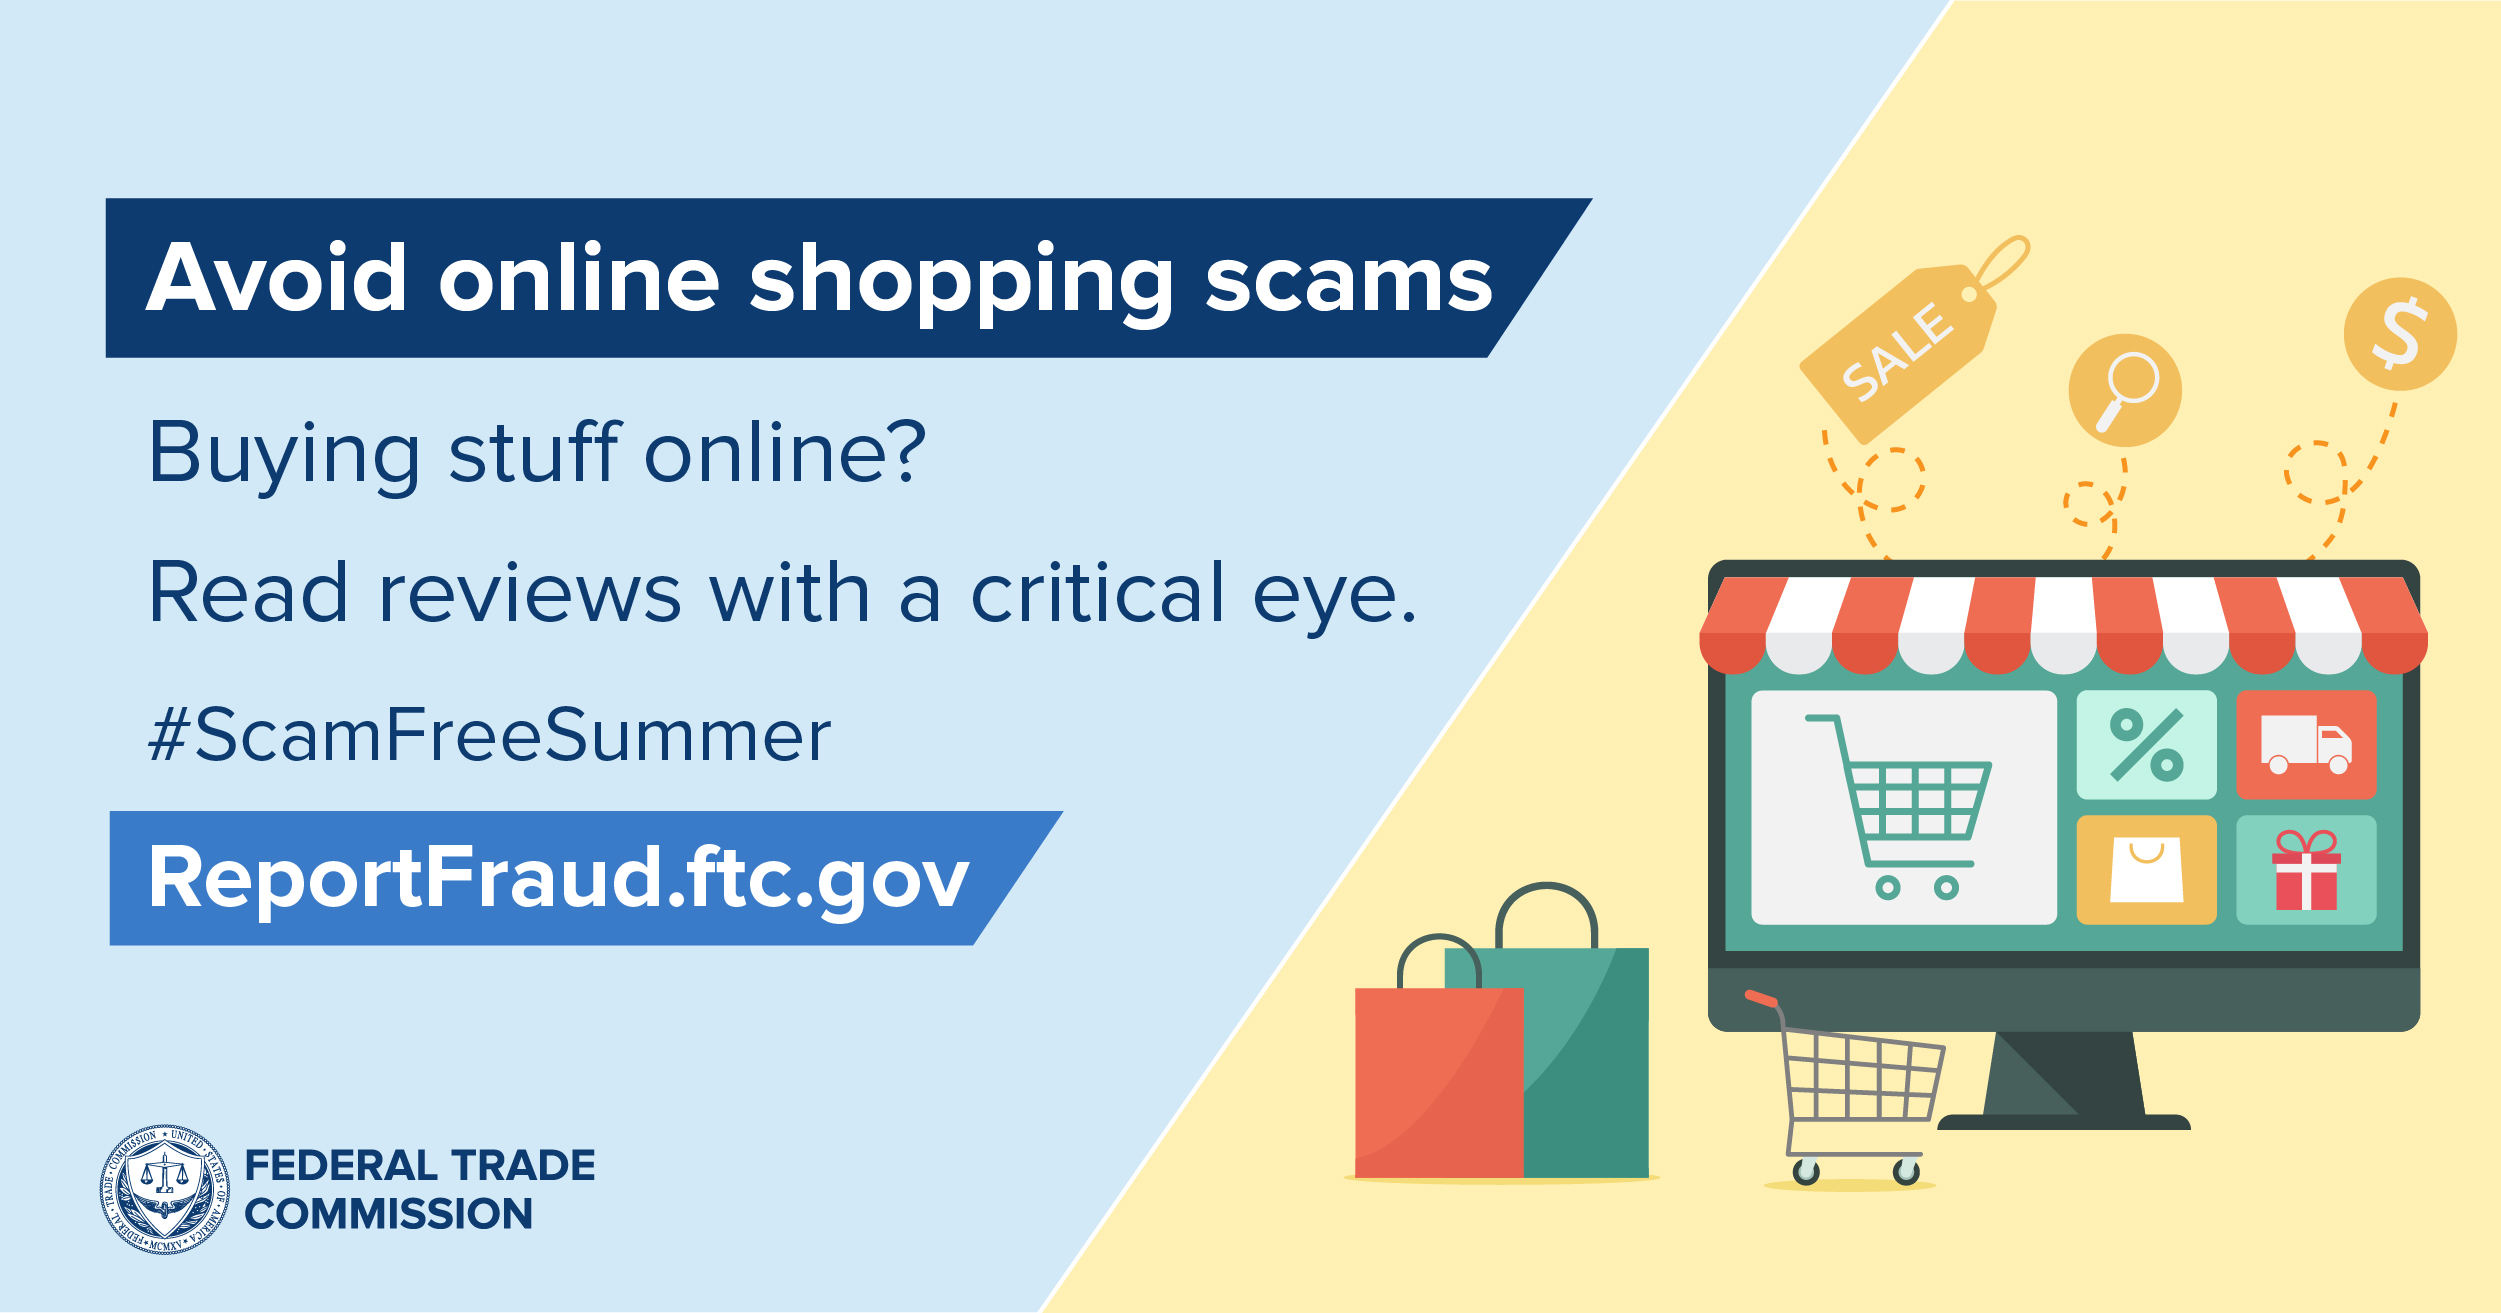 Avoid online shopping scams: Buying stuff online? Read reviews with a critical eye. #Scam Free Summer. ReportFraud.ftc.gov. Graphic of shopping bags, shopping cart, and computer screen with a protruding storefront awning and  squares with a shopping  "symbols" (shopping cart, percentage sign, truck,  wrapped gift, shopping bag)